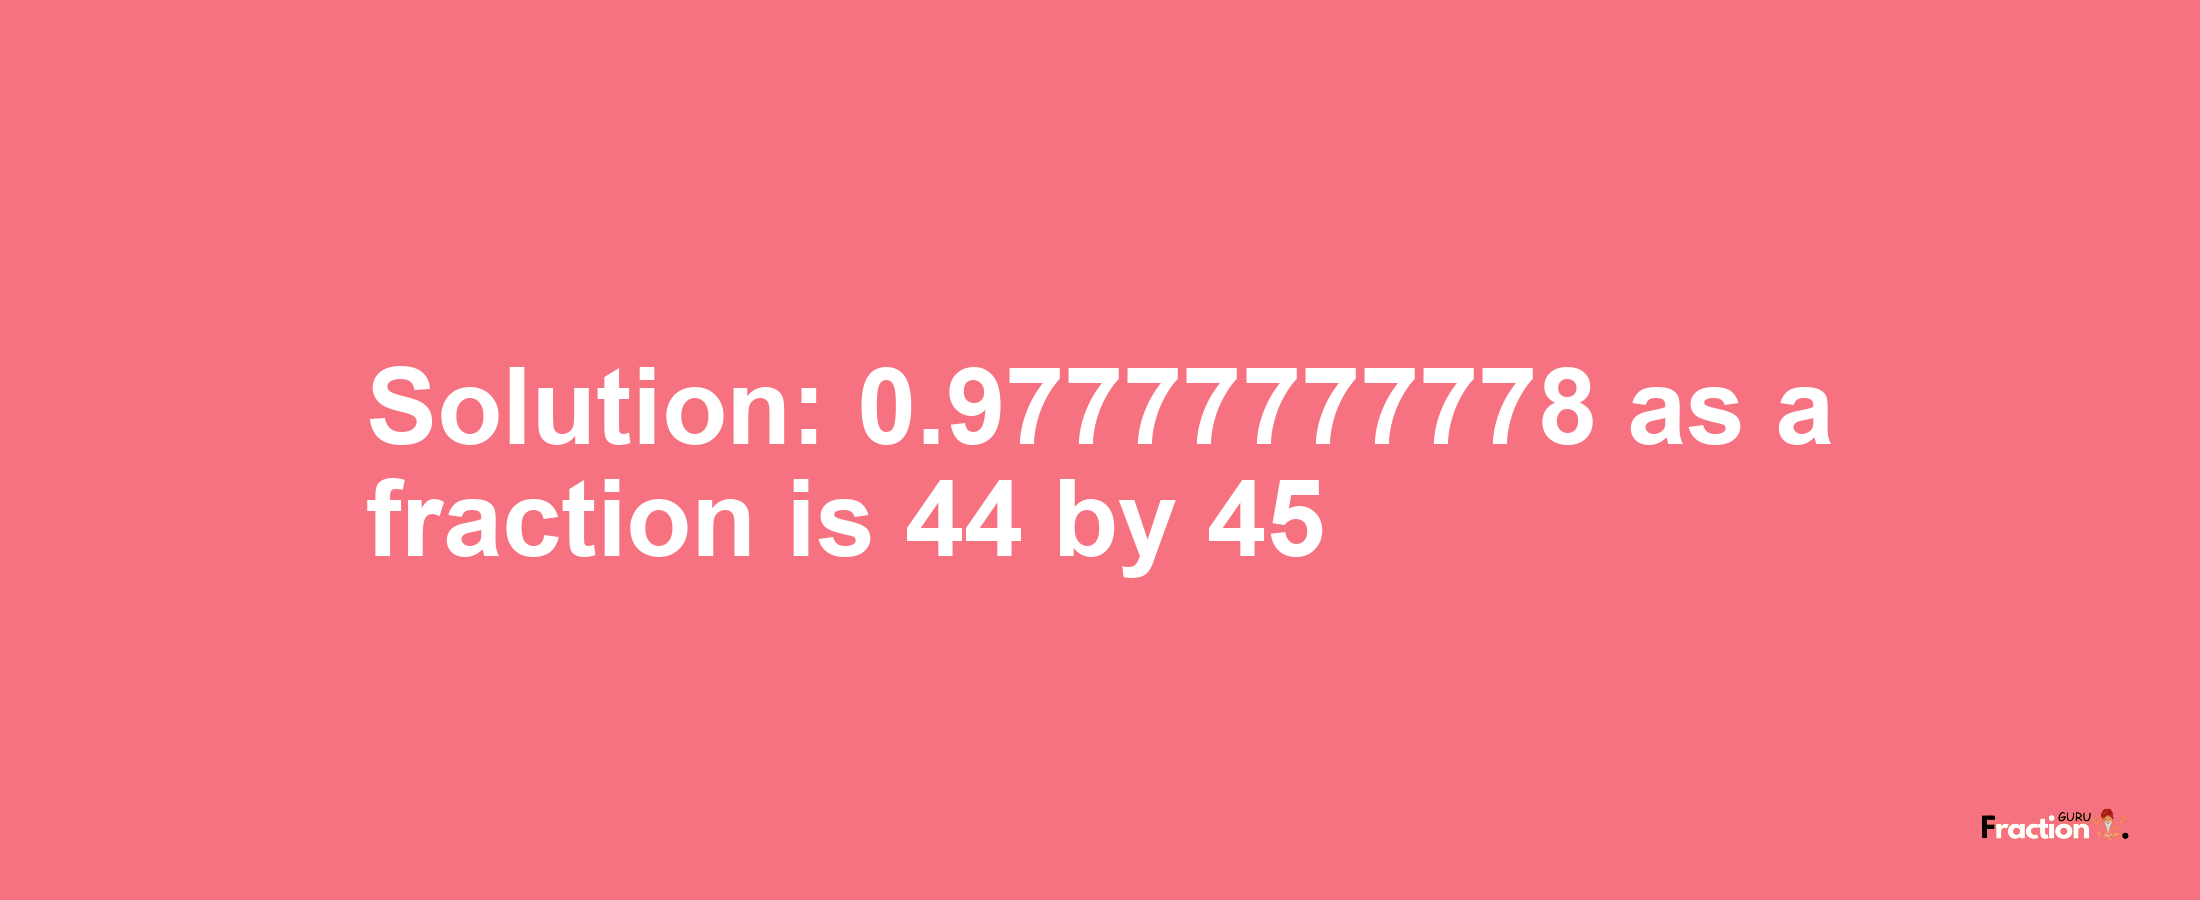 Solution:0.97777777778 as a fraction is 44/45